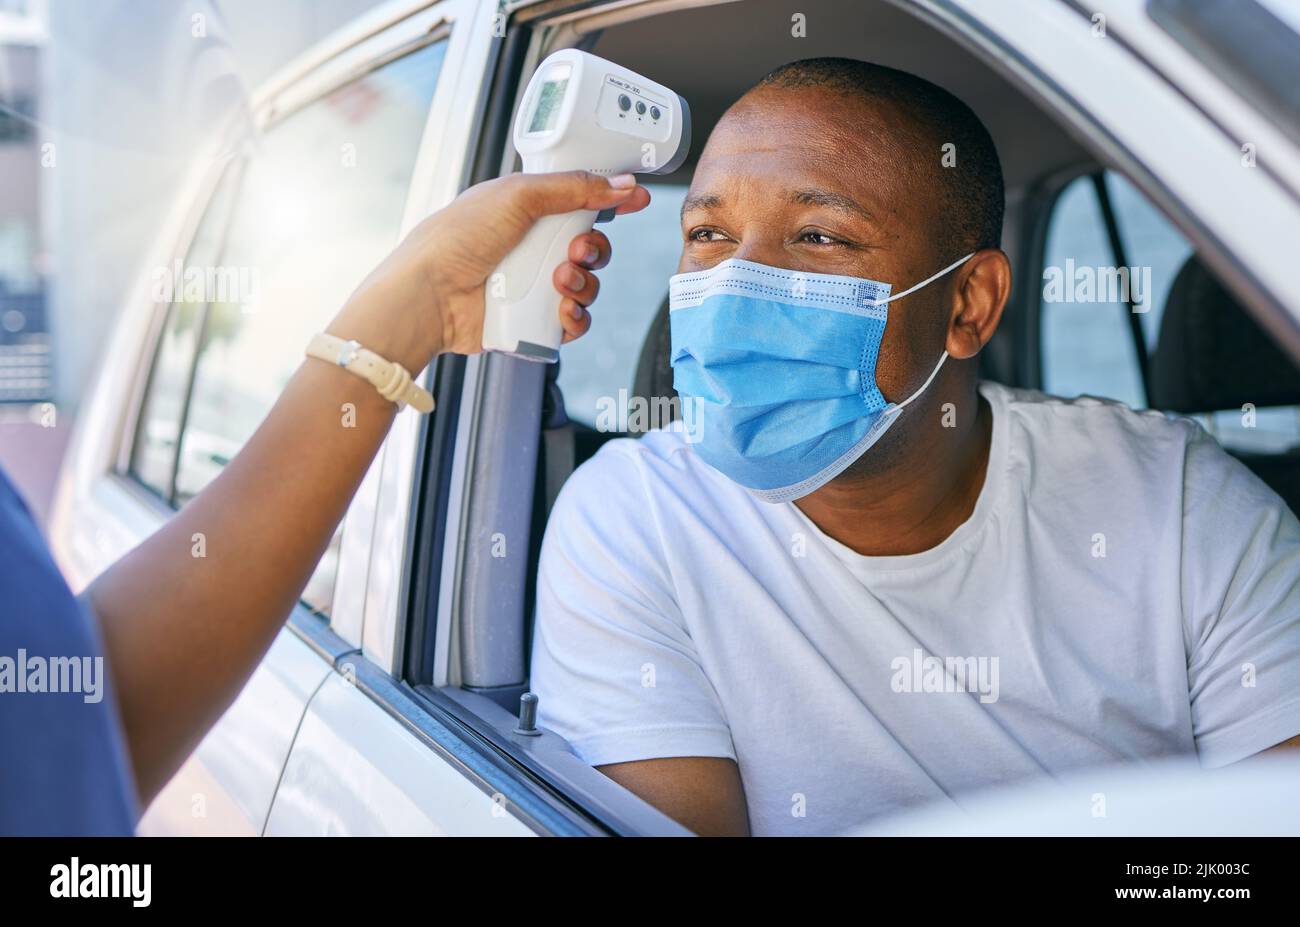 Covid, corona and infection testing site as a drive thru service station for people traveling. African man wearing a protective face mask to avoid Stock Photo